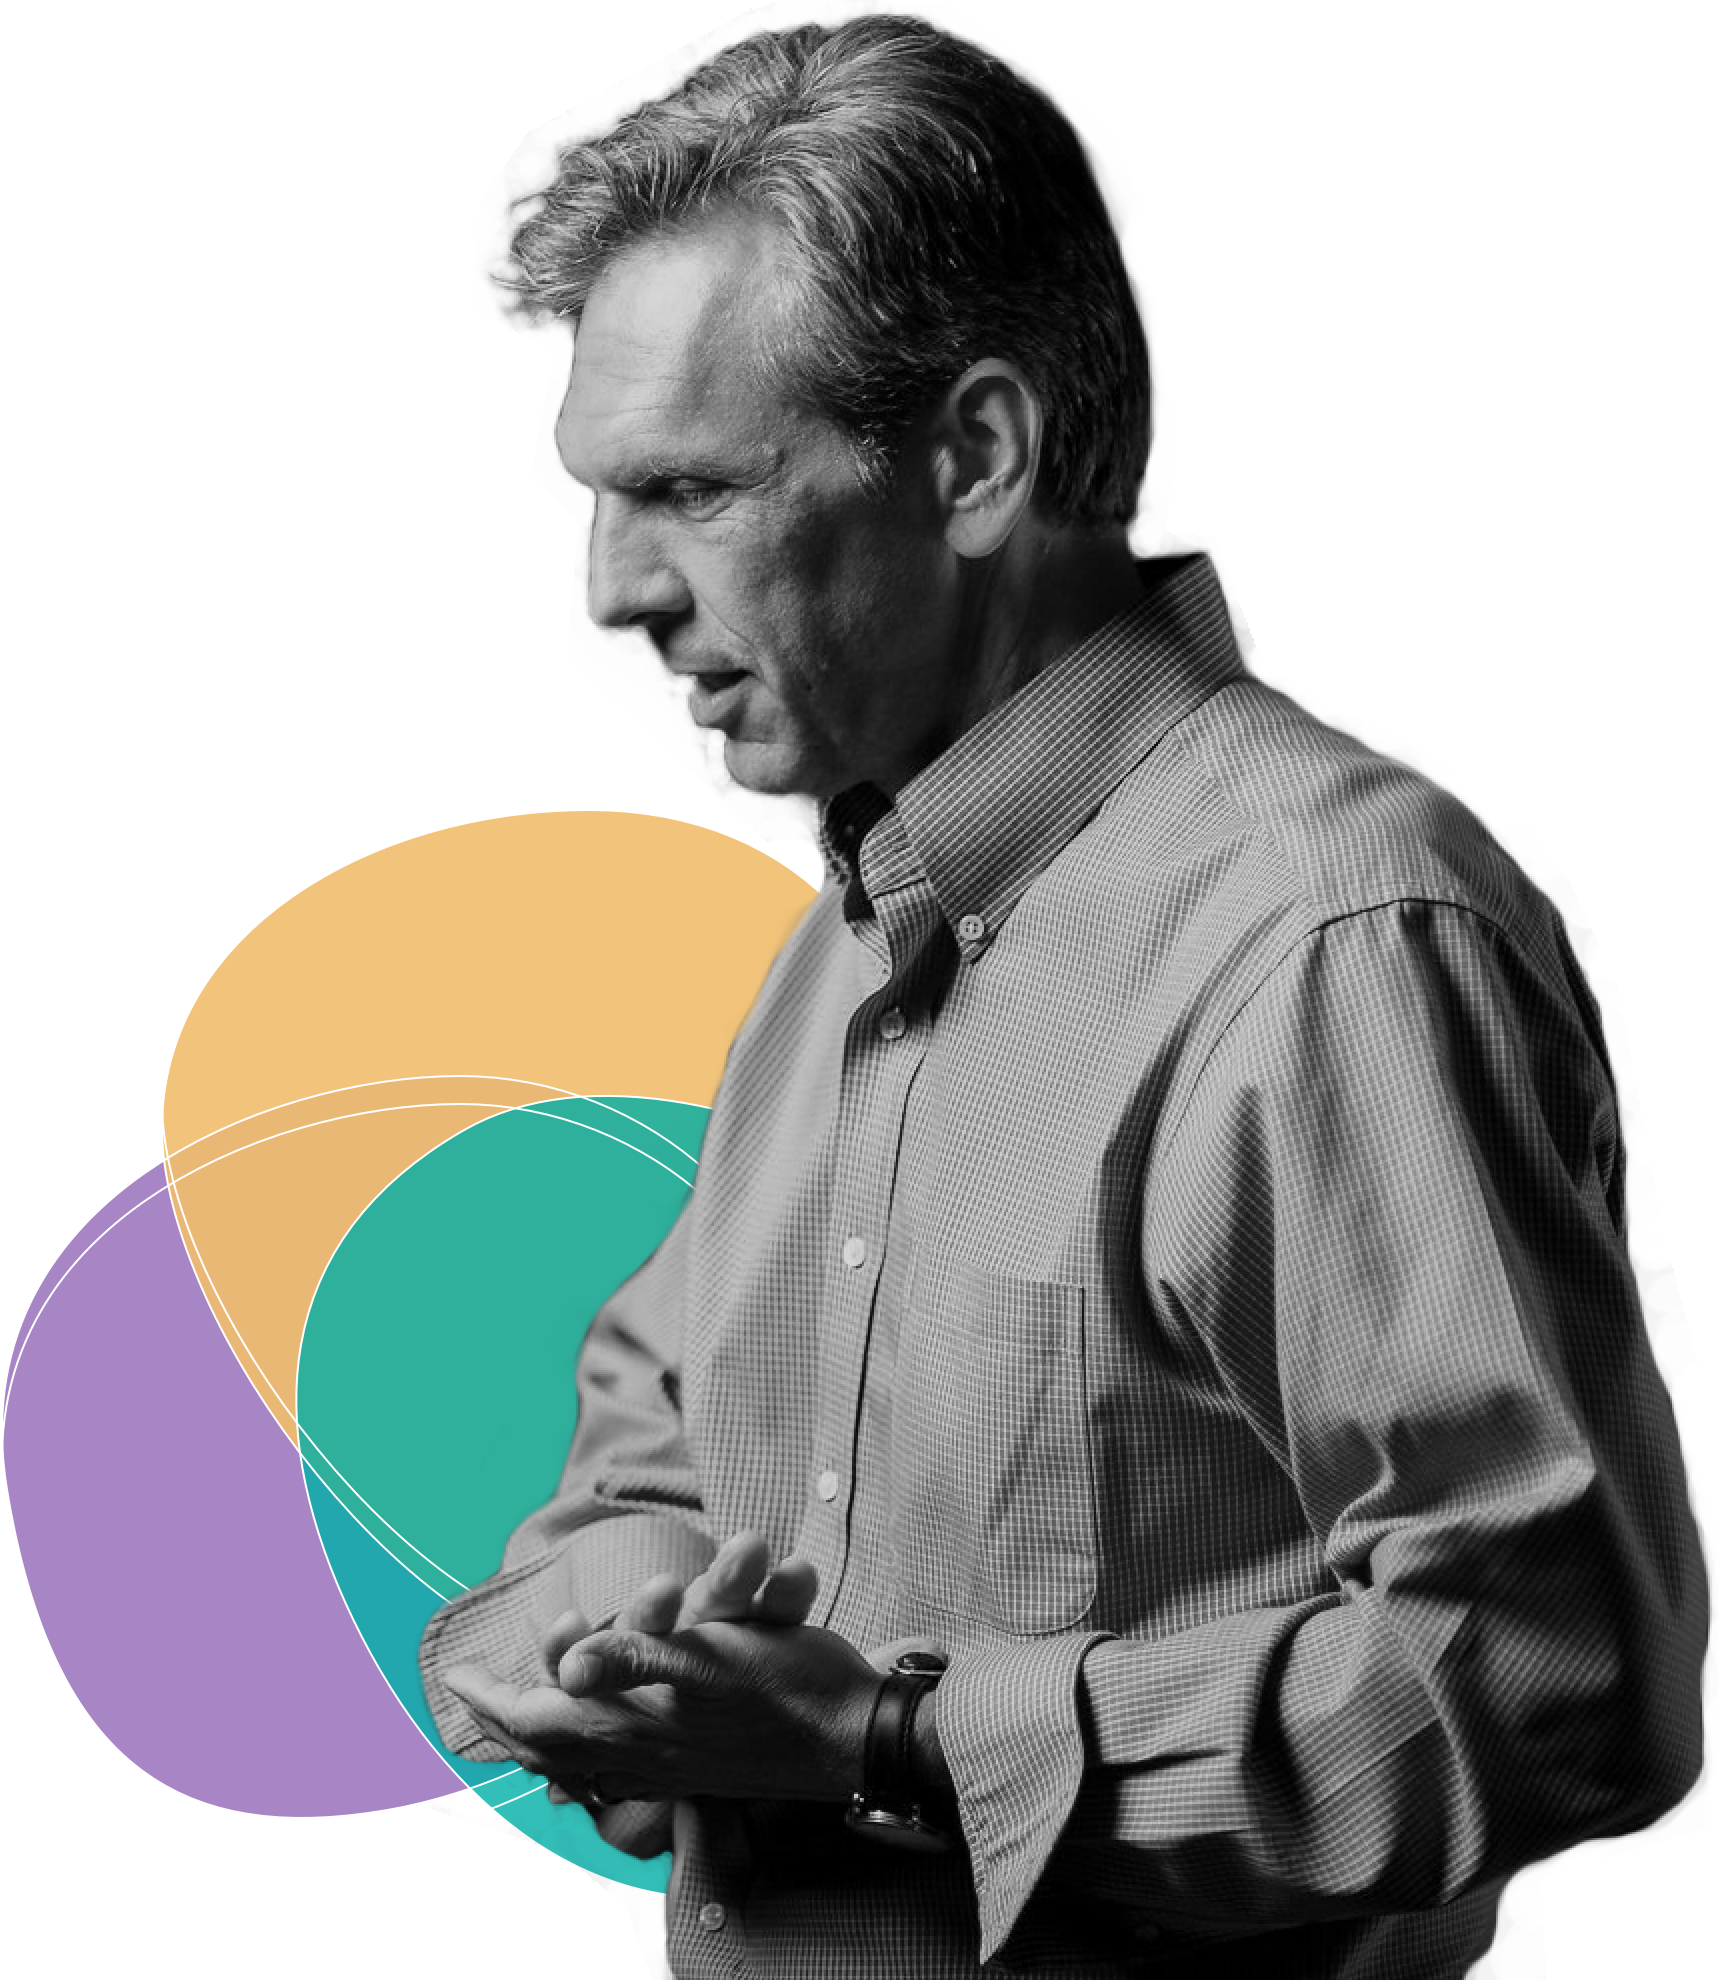 Portrait of Todd with illustration of color circles intersecting